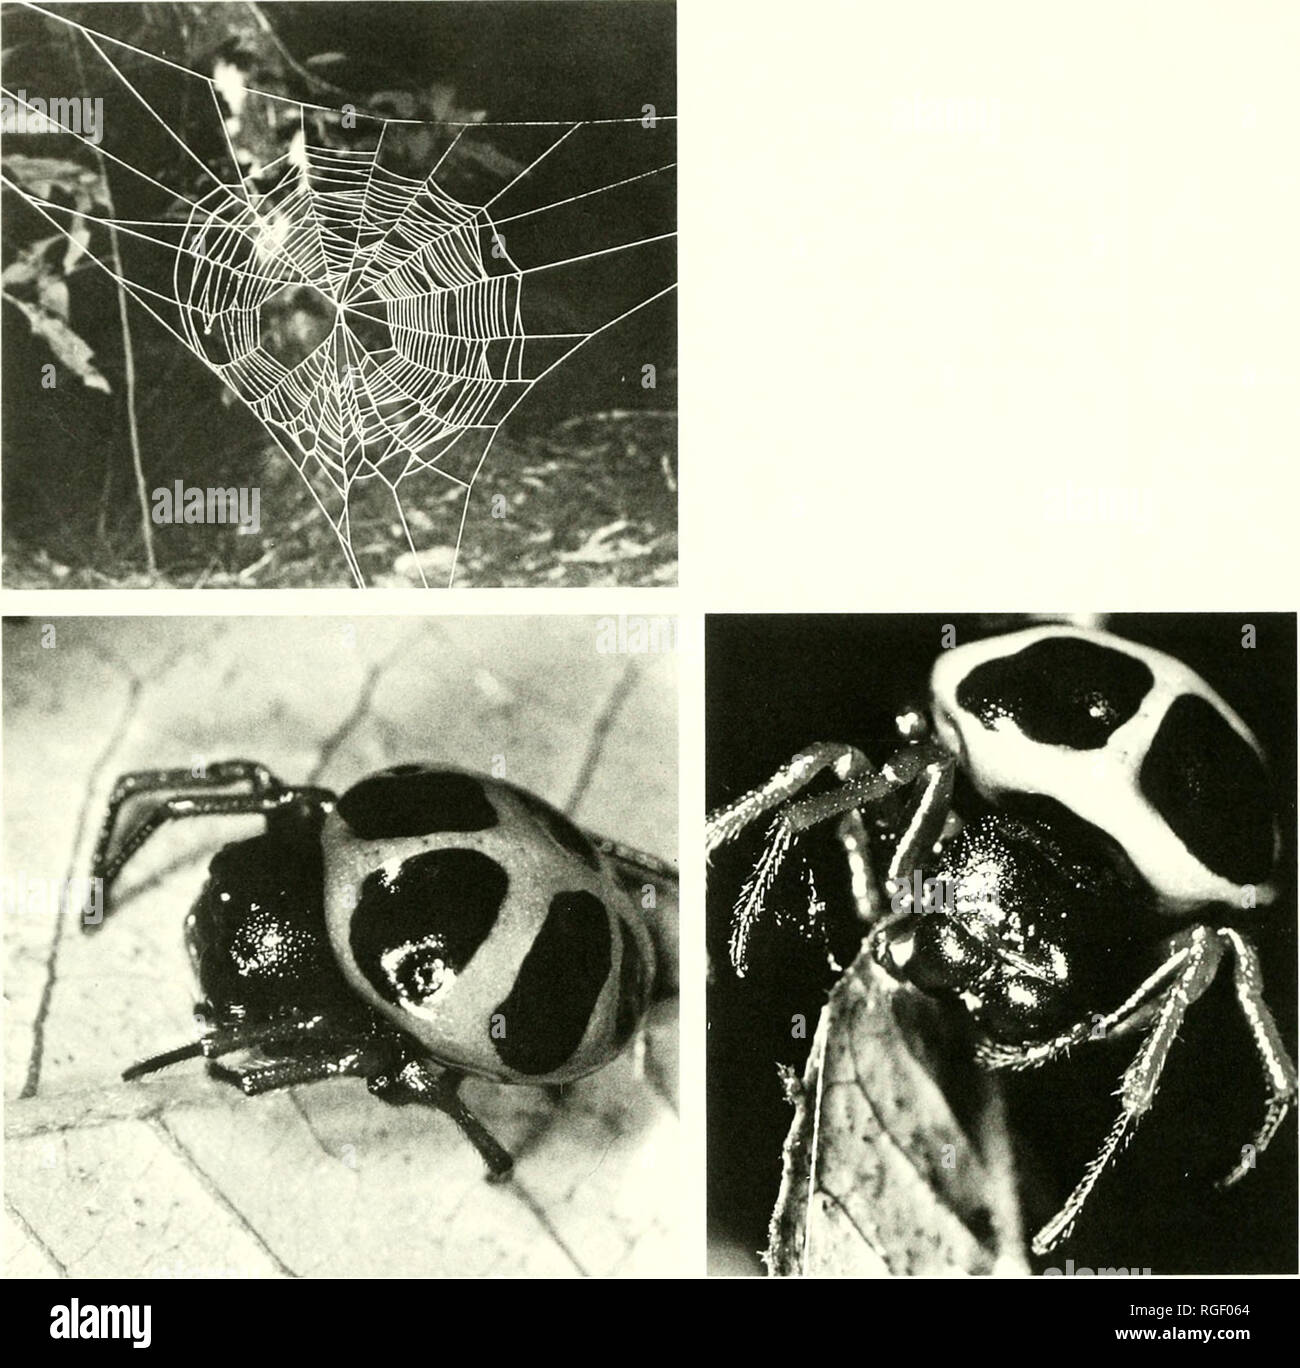 . Bulletin of the Museum of Comparative Zoology at Harvard College. Zoology. 130 BuUetiu Museum of Comparative Zoology, Vol. 155, No. 3. Plate 1. Upper left, web of Hypognatha scutata from Trinidad, 14 cm horizontal diameter of web (photo J. Coddington). Lower, female Encyosaccus sexmaculatus from near Iquitos, Peru (photo J. Warfel). mill long, 2. and males have been of being collected to- fourdi 1.0. Abdomen 2.4 wide. Note. Females matched on basis gether. Variation. Total length of females 8.5 to 9.4 mm. The coloration of females is vari- able. The holotyj^e has the cephalic area of the car Stock Photo